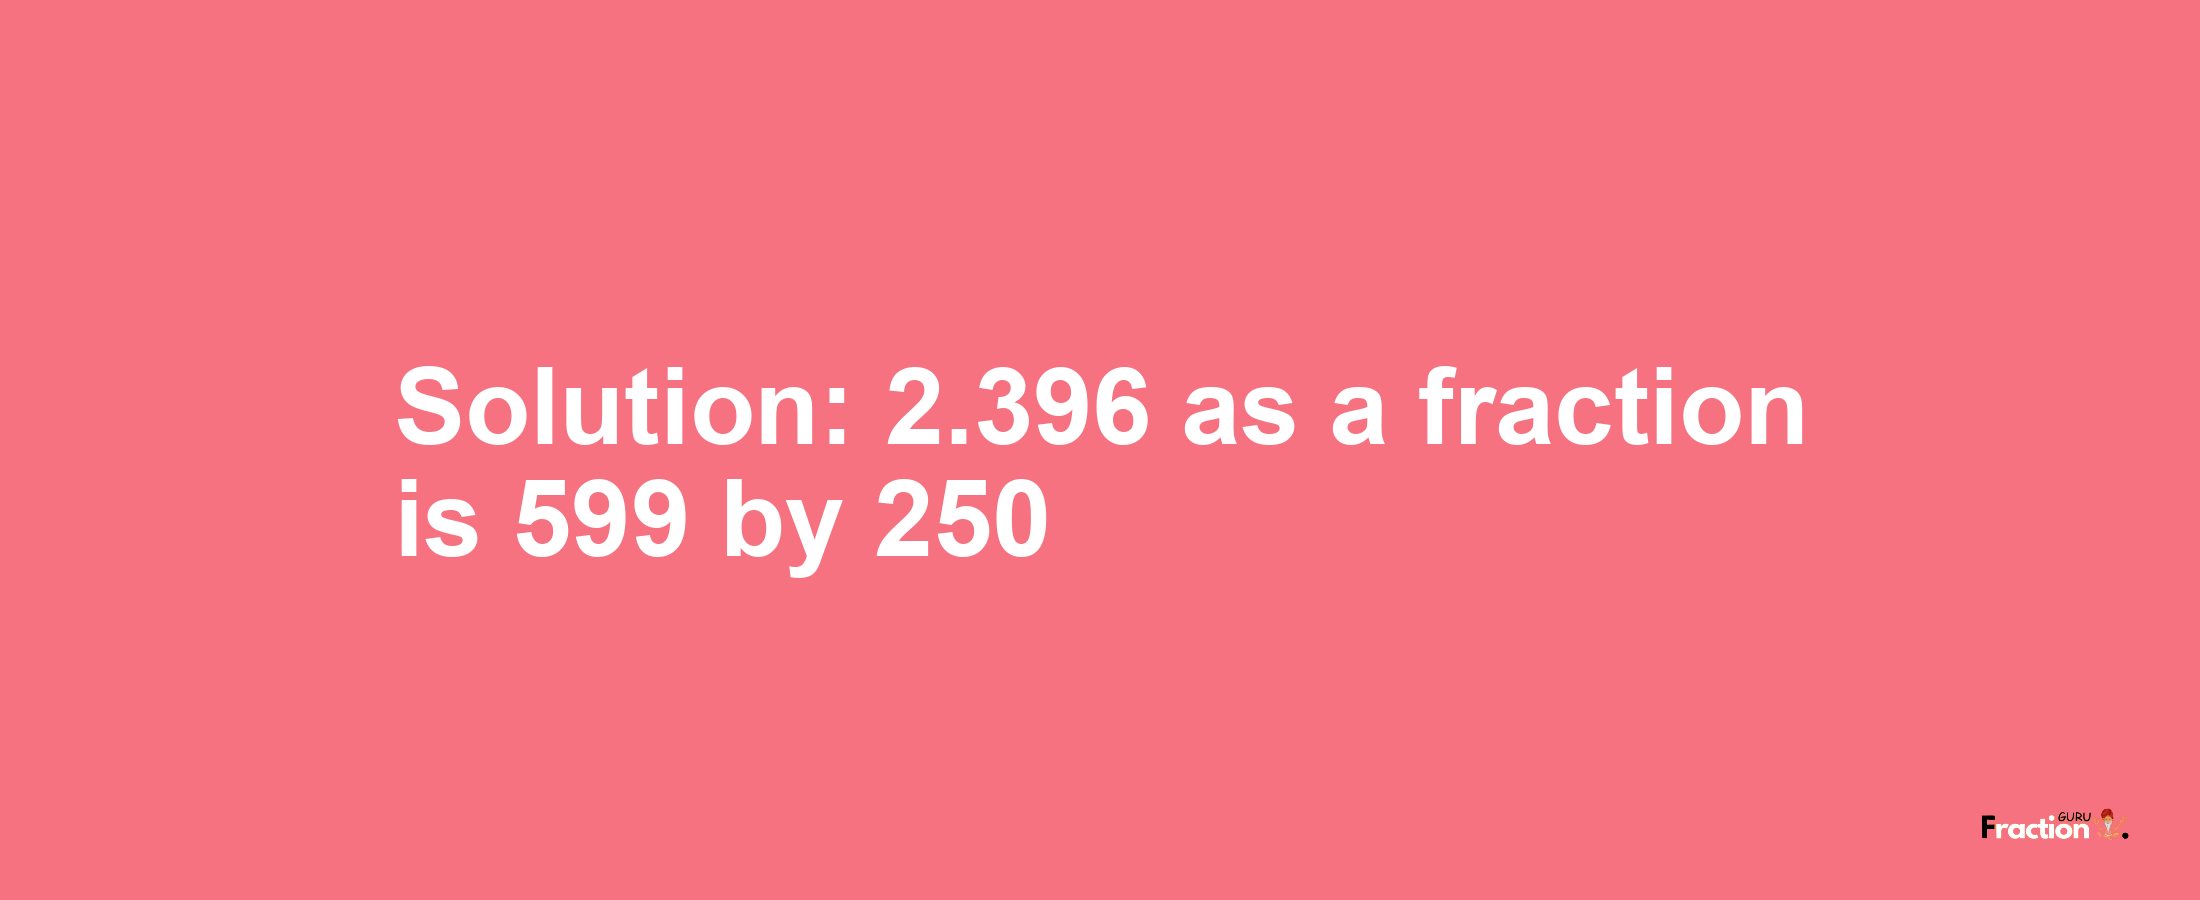 Solution:2.396 as a fraction is 599/250